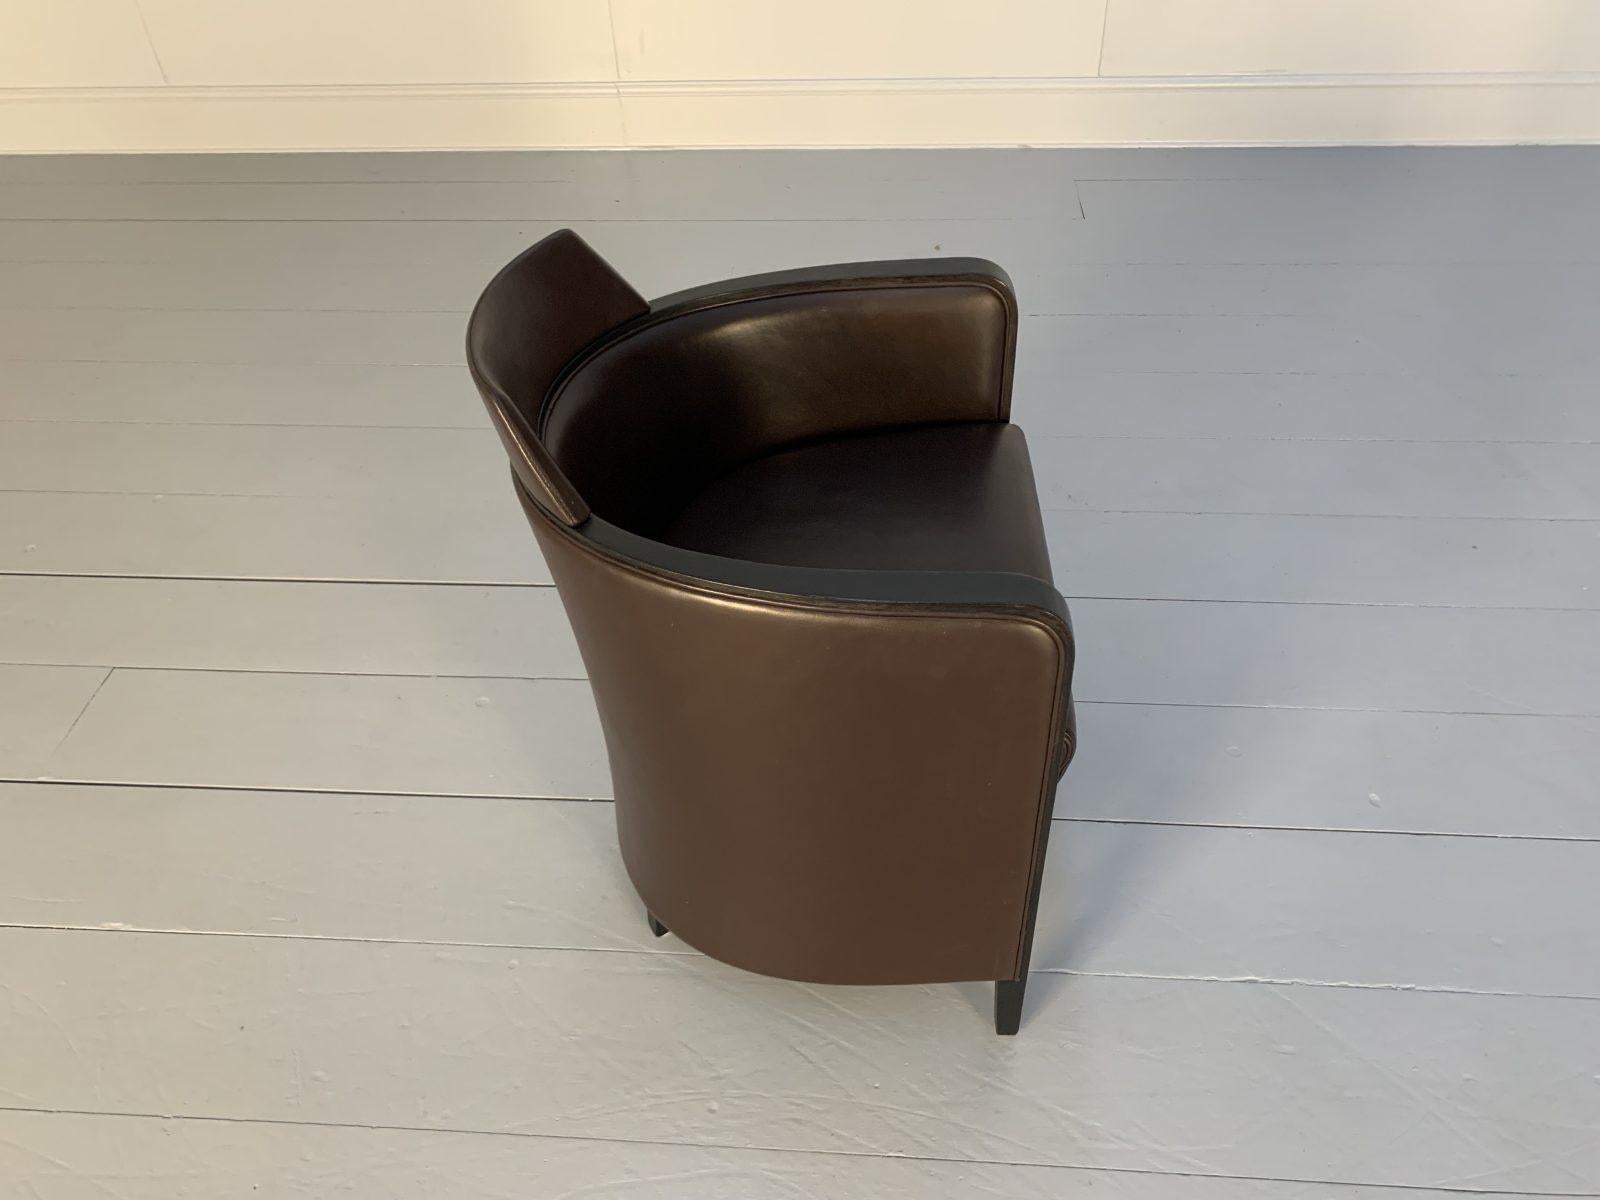 Moroso “Miss” Armchair, in Dark Brown Leather For Sale 4